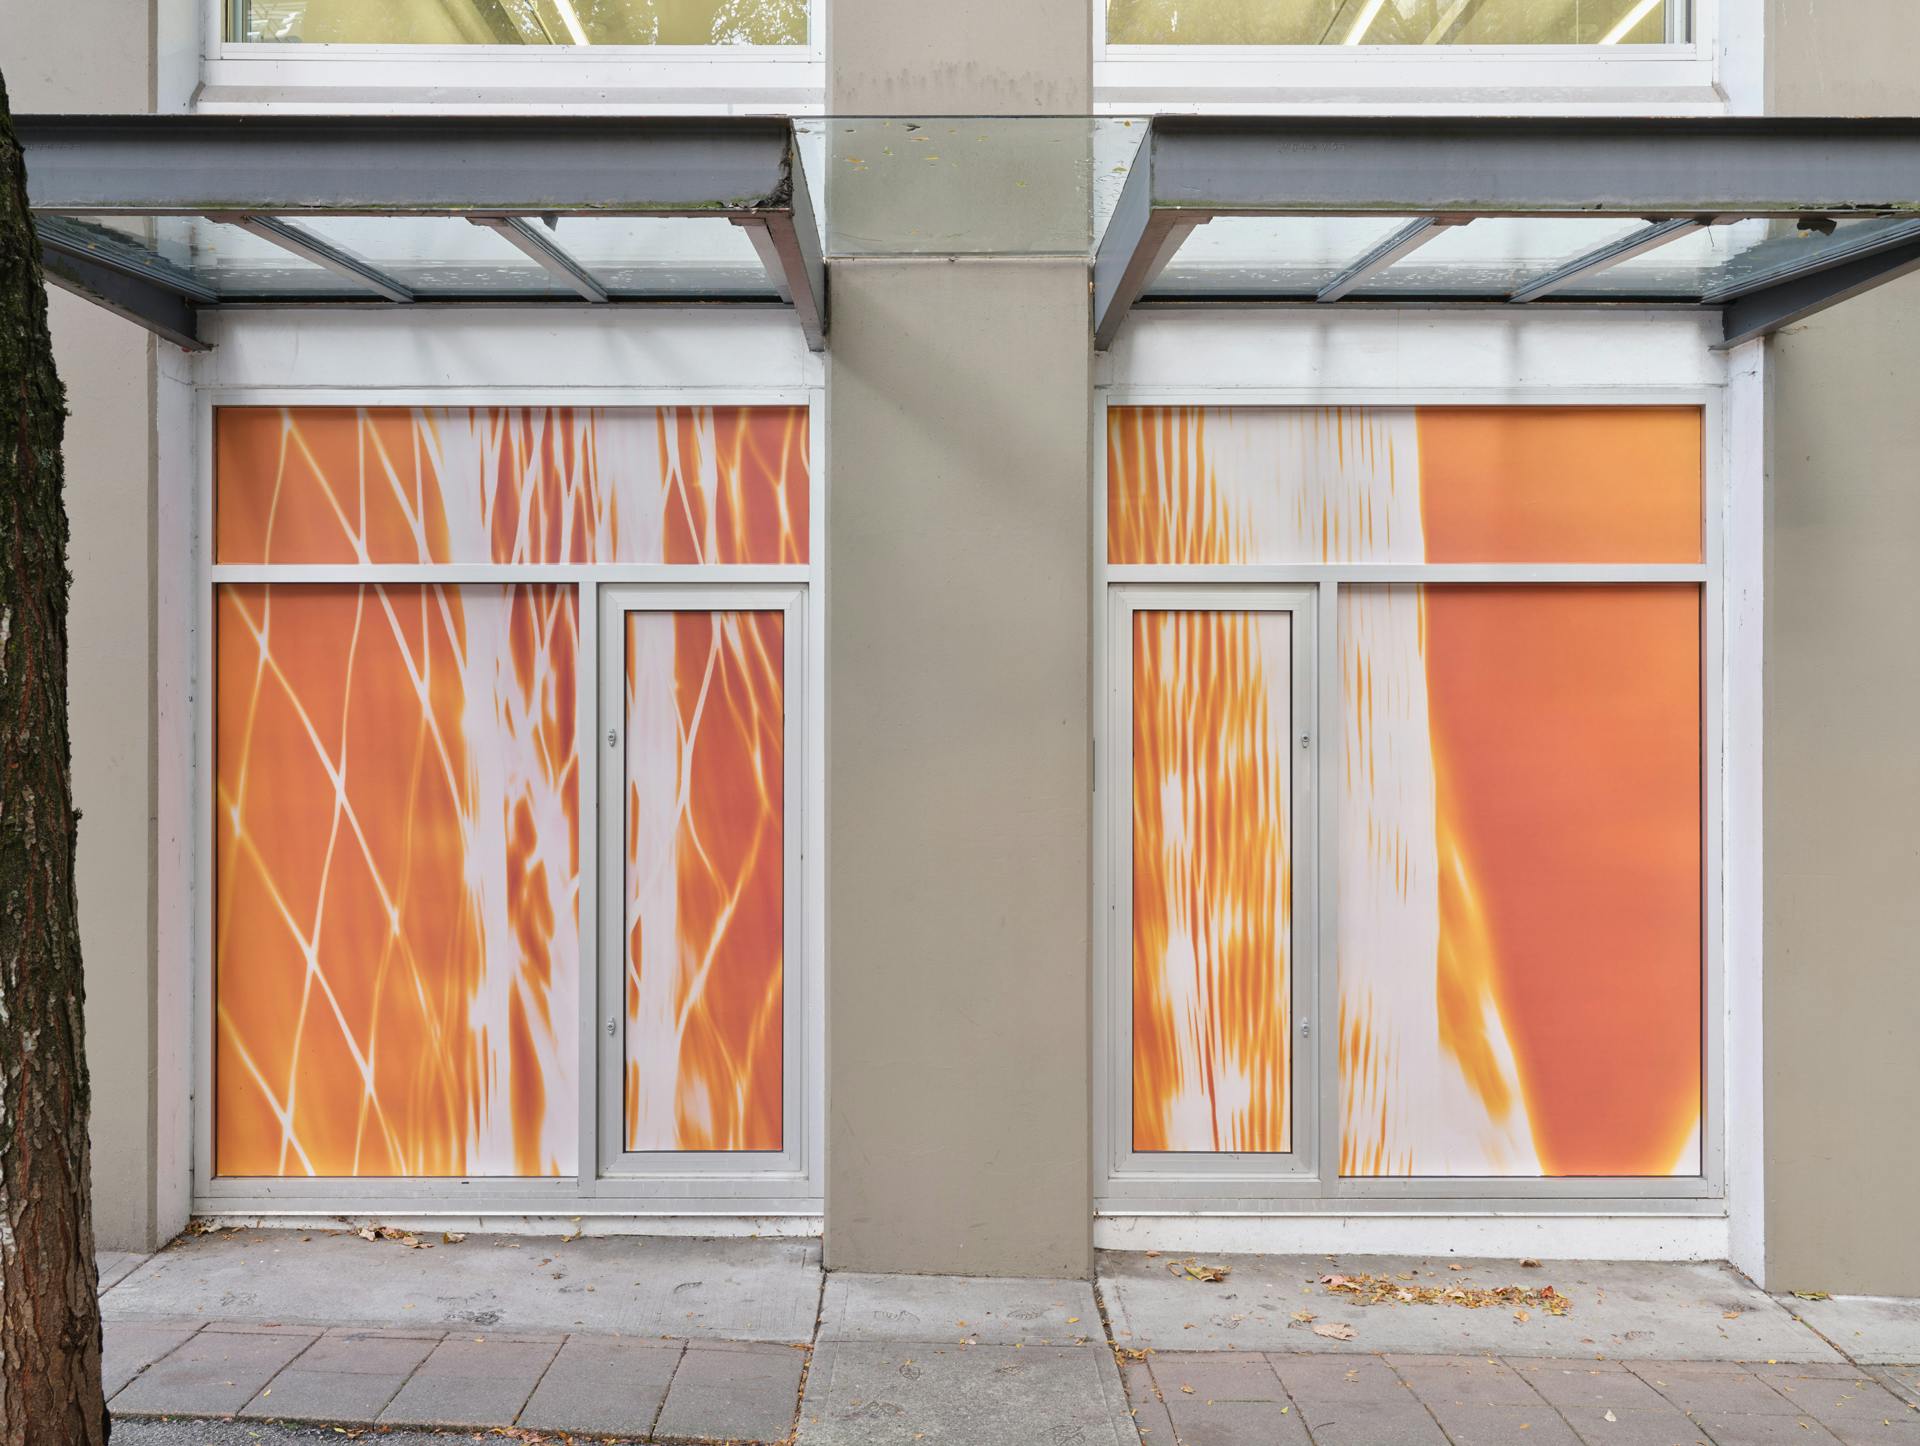 "A pair of windows featuring a pair of photograms depicting nylon mesh produce bags against neon orange backgrounds."